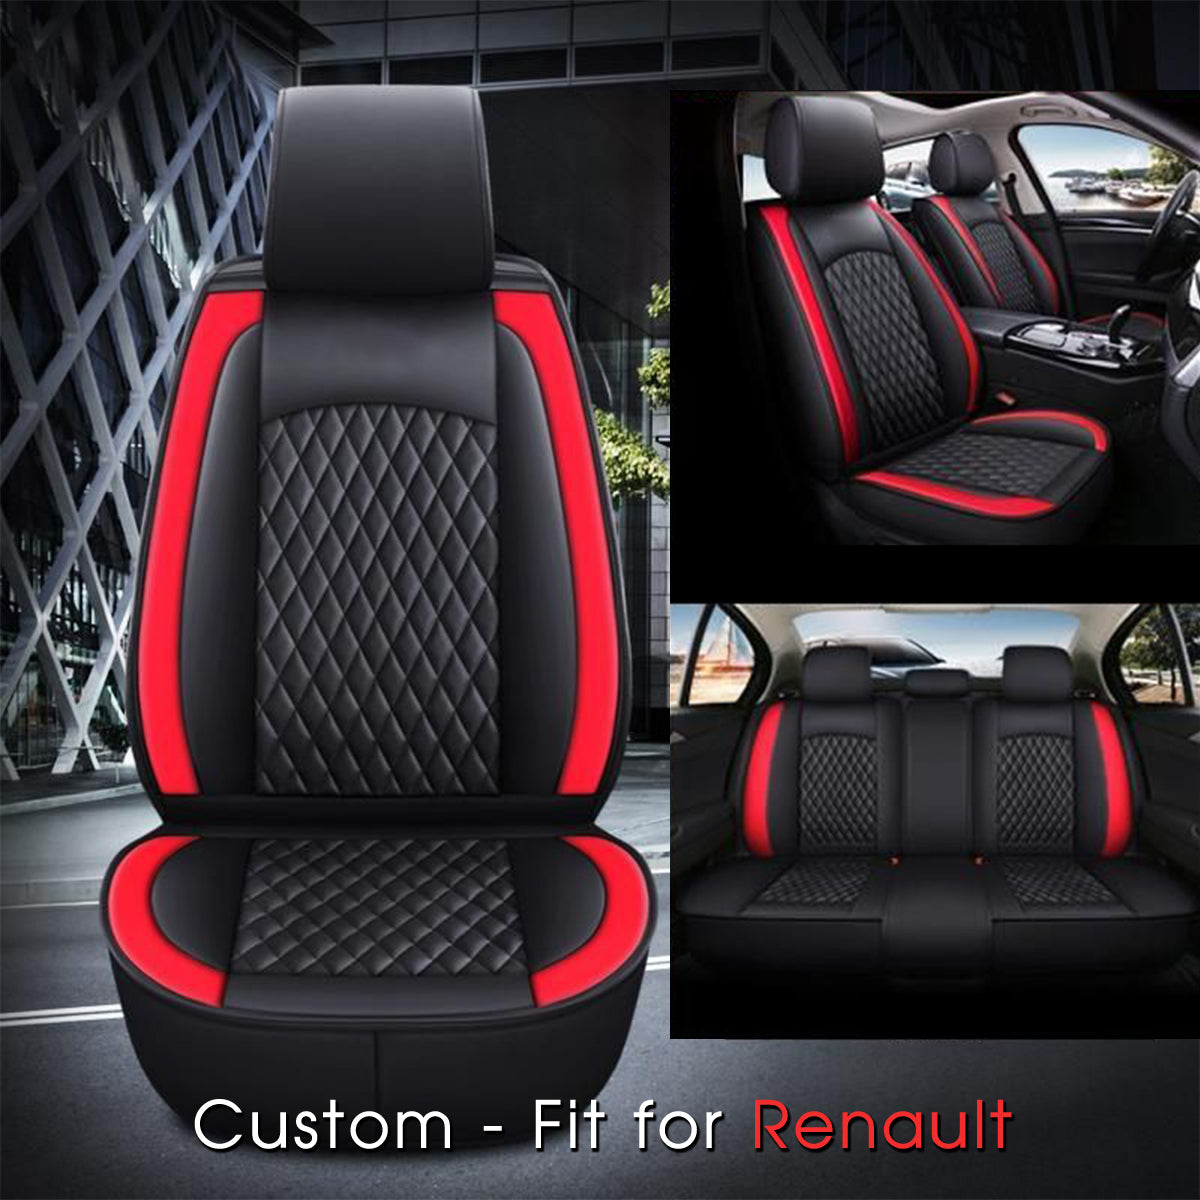 2 Car Seat Covers Full Set, Custom-Fit For Car, Waterproof Leather Front Rear Seat Automotive Protection Cushions, Car Accessories DLSA2111